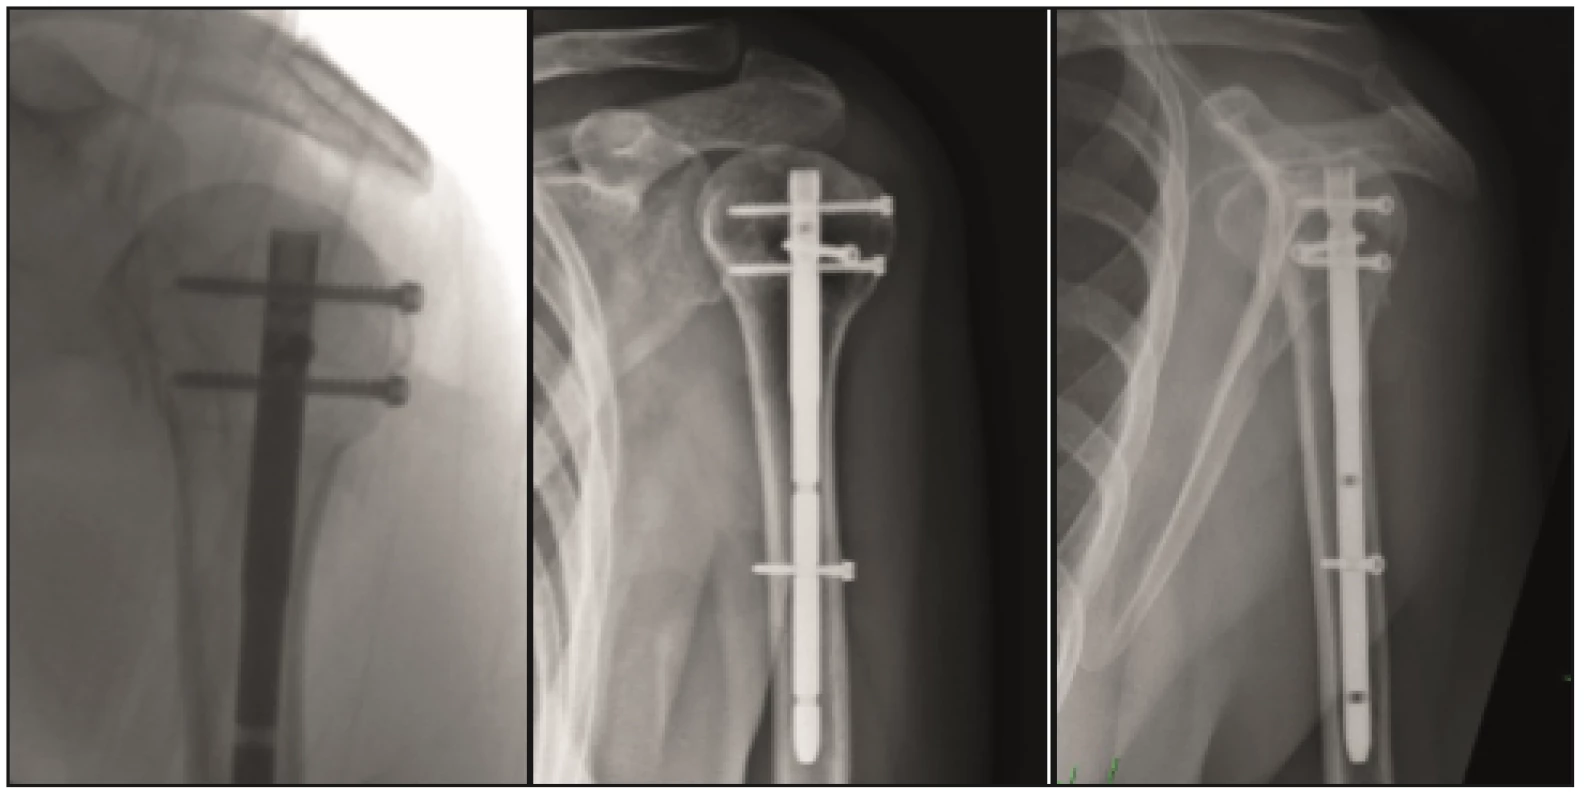 Woman 58 years old, AO B1.1 fracture, fall due to tripping, operation on day 1 after the injury. X-ray healing in 14 weeks; redress + arthroscopy in 8 months, resulting elevation of 160°